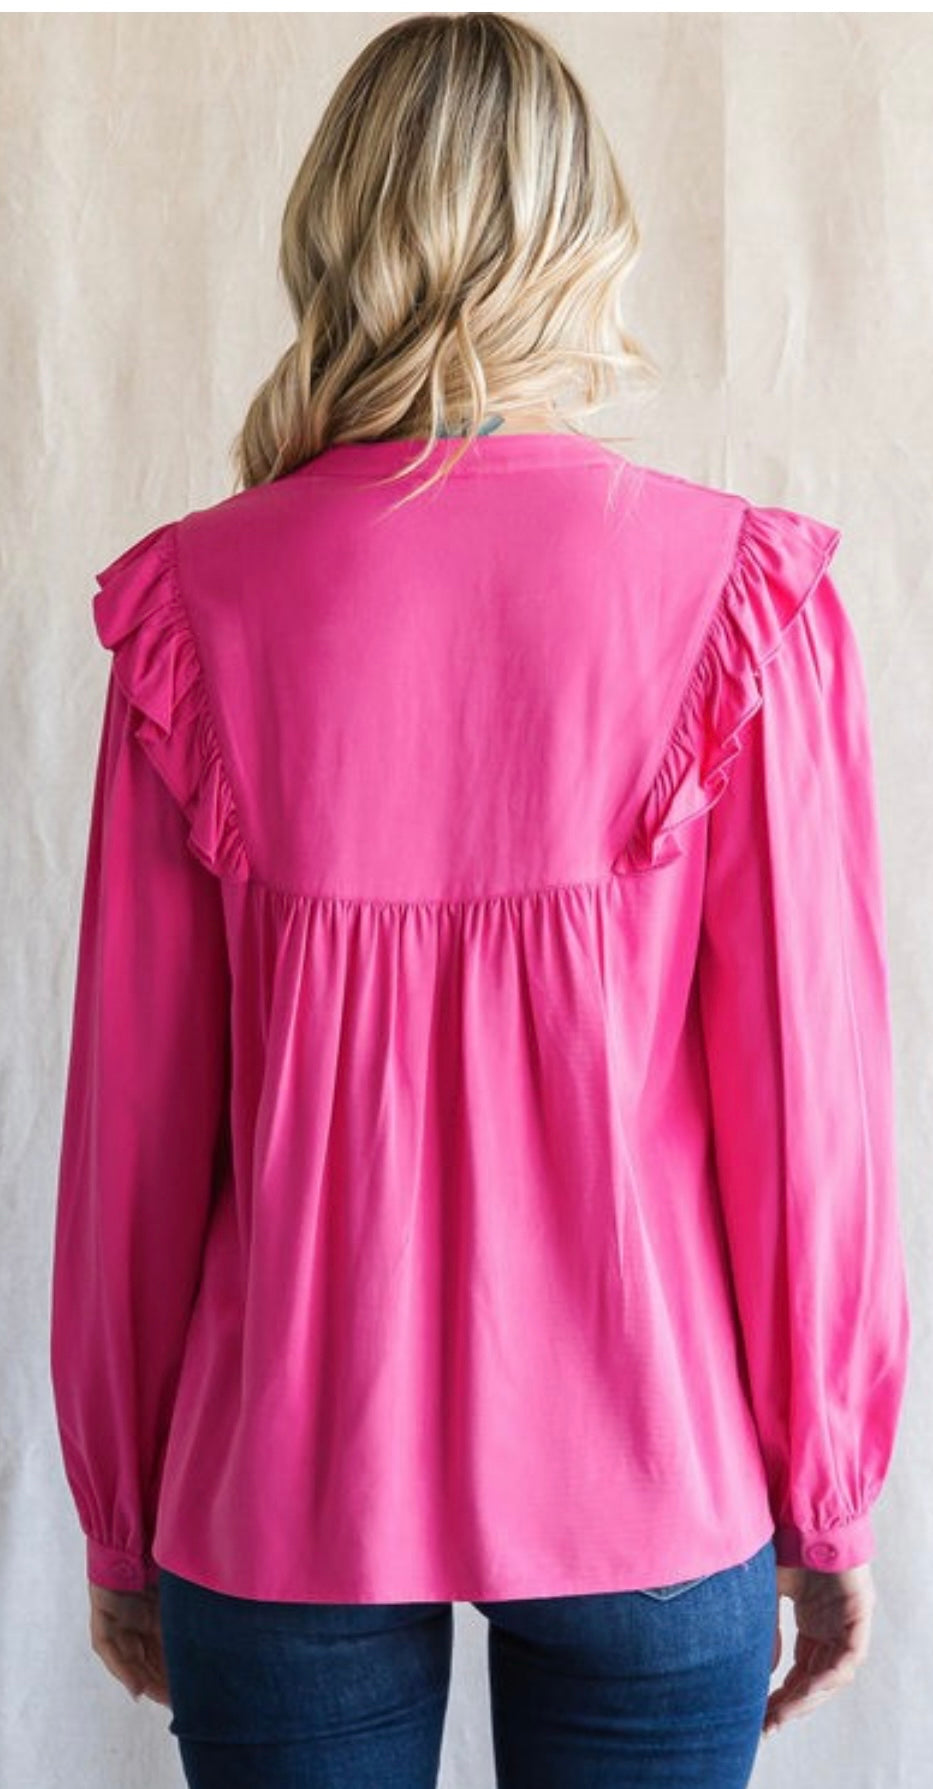 Solid hot pink Ruffled Embroidery Yoke Top